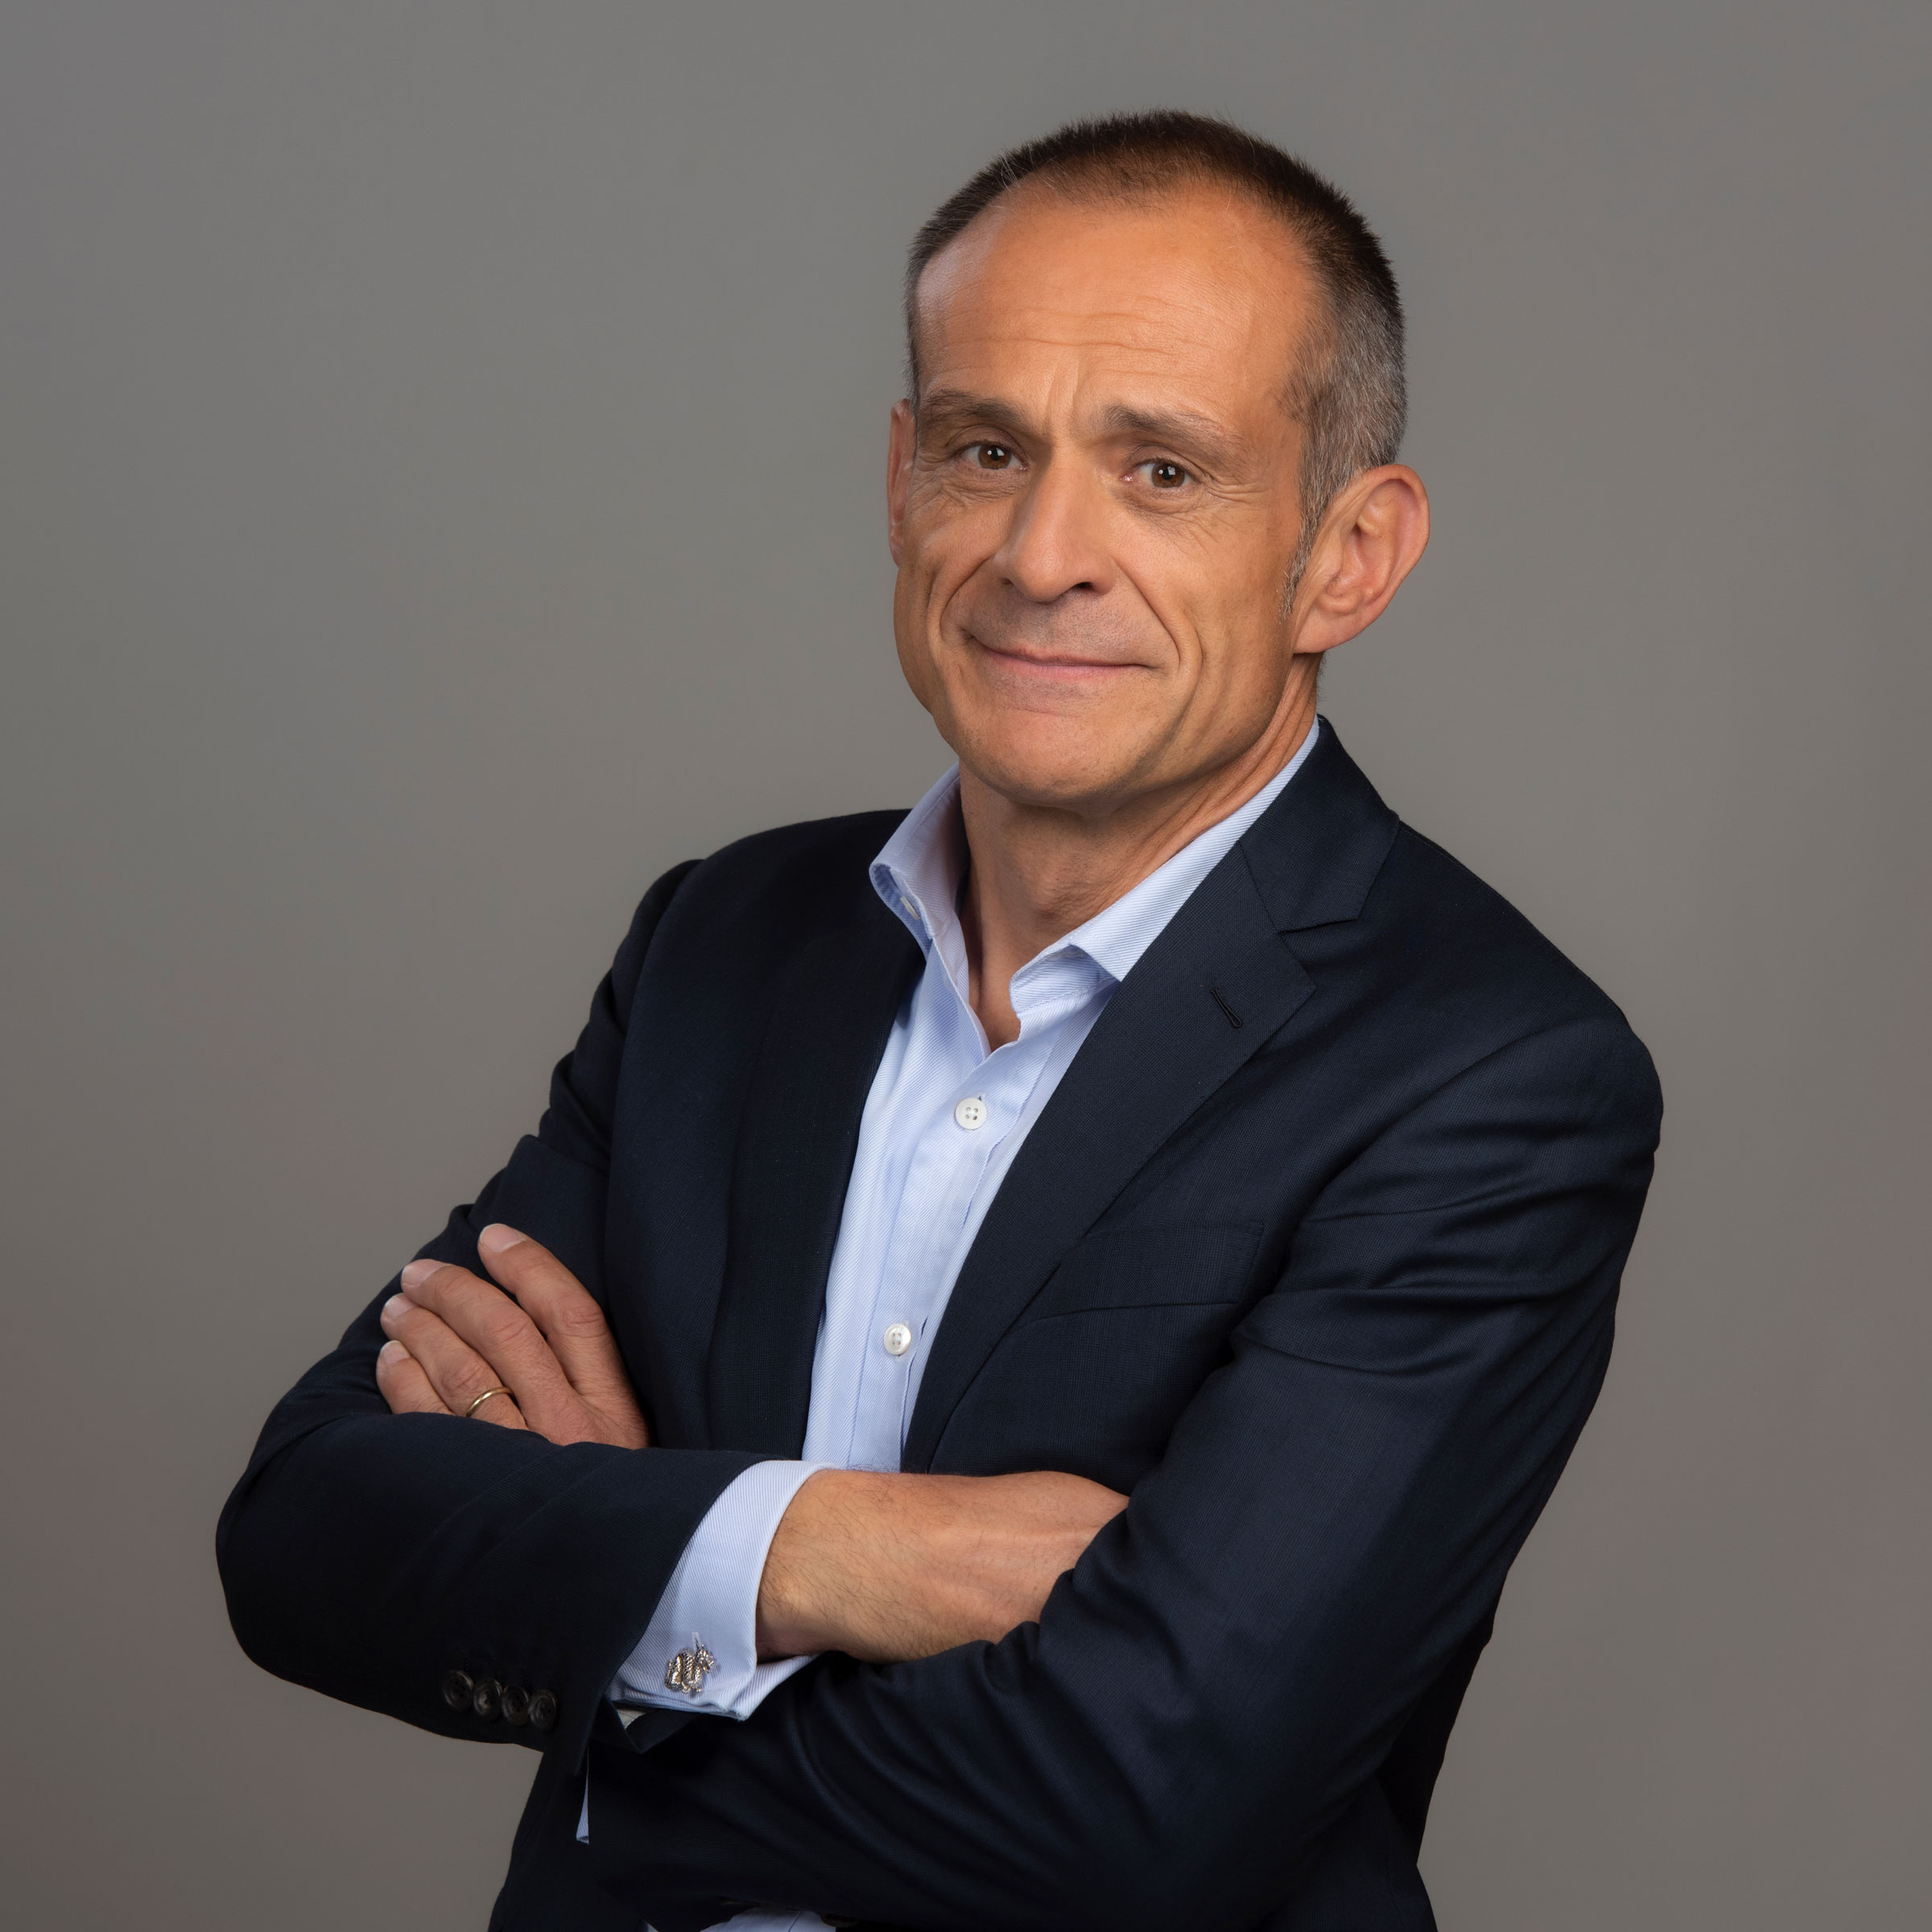 Jean-Pascal Tricoire, Chairman and CEO, Schneider Electric (Courtesy of Schneider Electric)